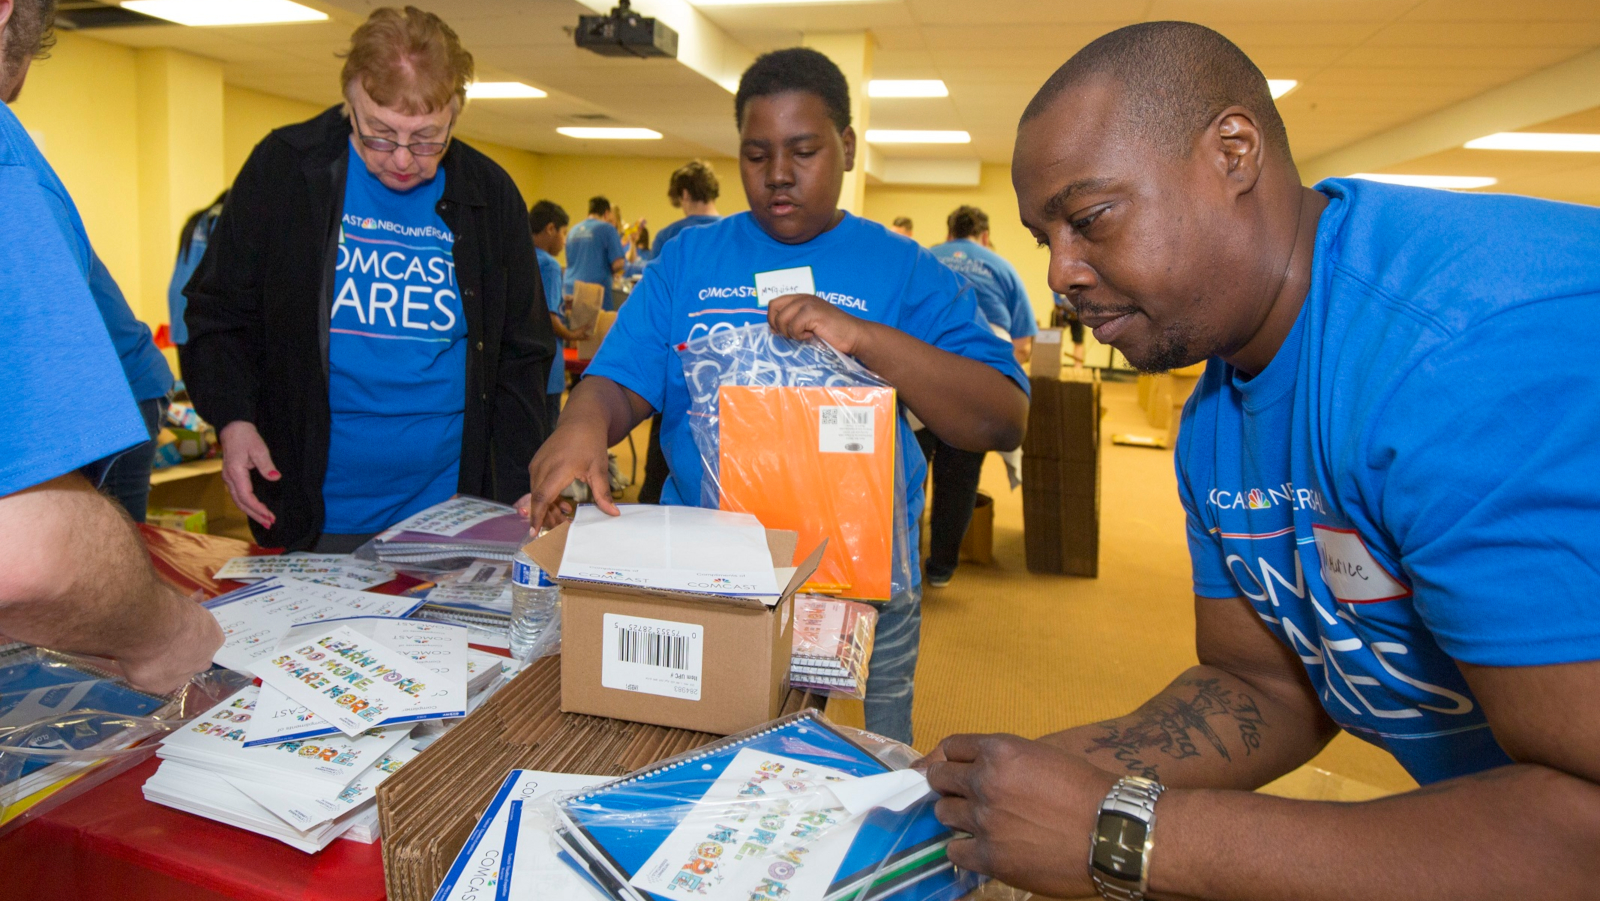 Comcast Cares Day volunteers pack homework kits for young students.